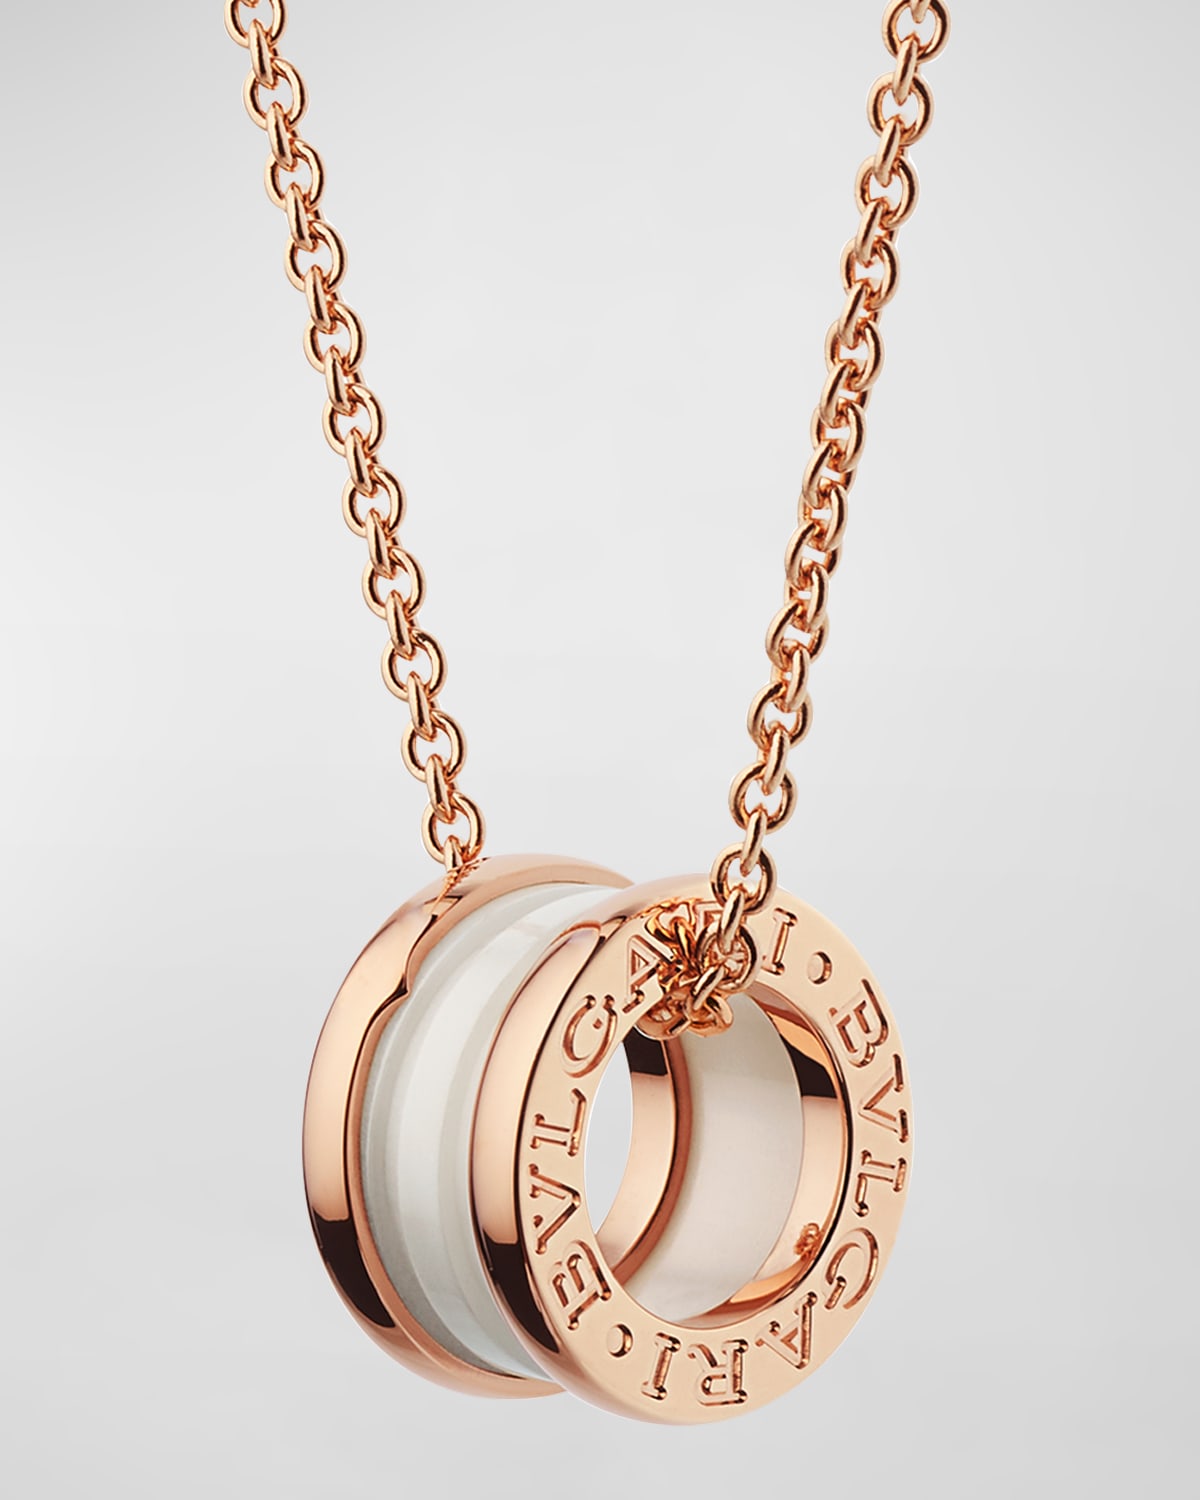 B.Zero1 Pendant Necklace in Pink Gold and White Ceramic